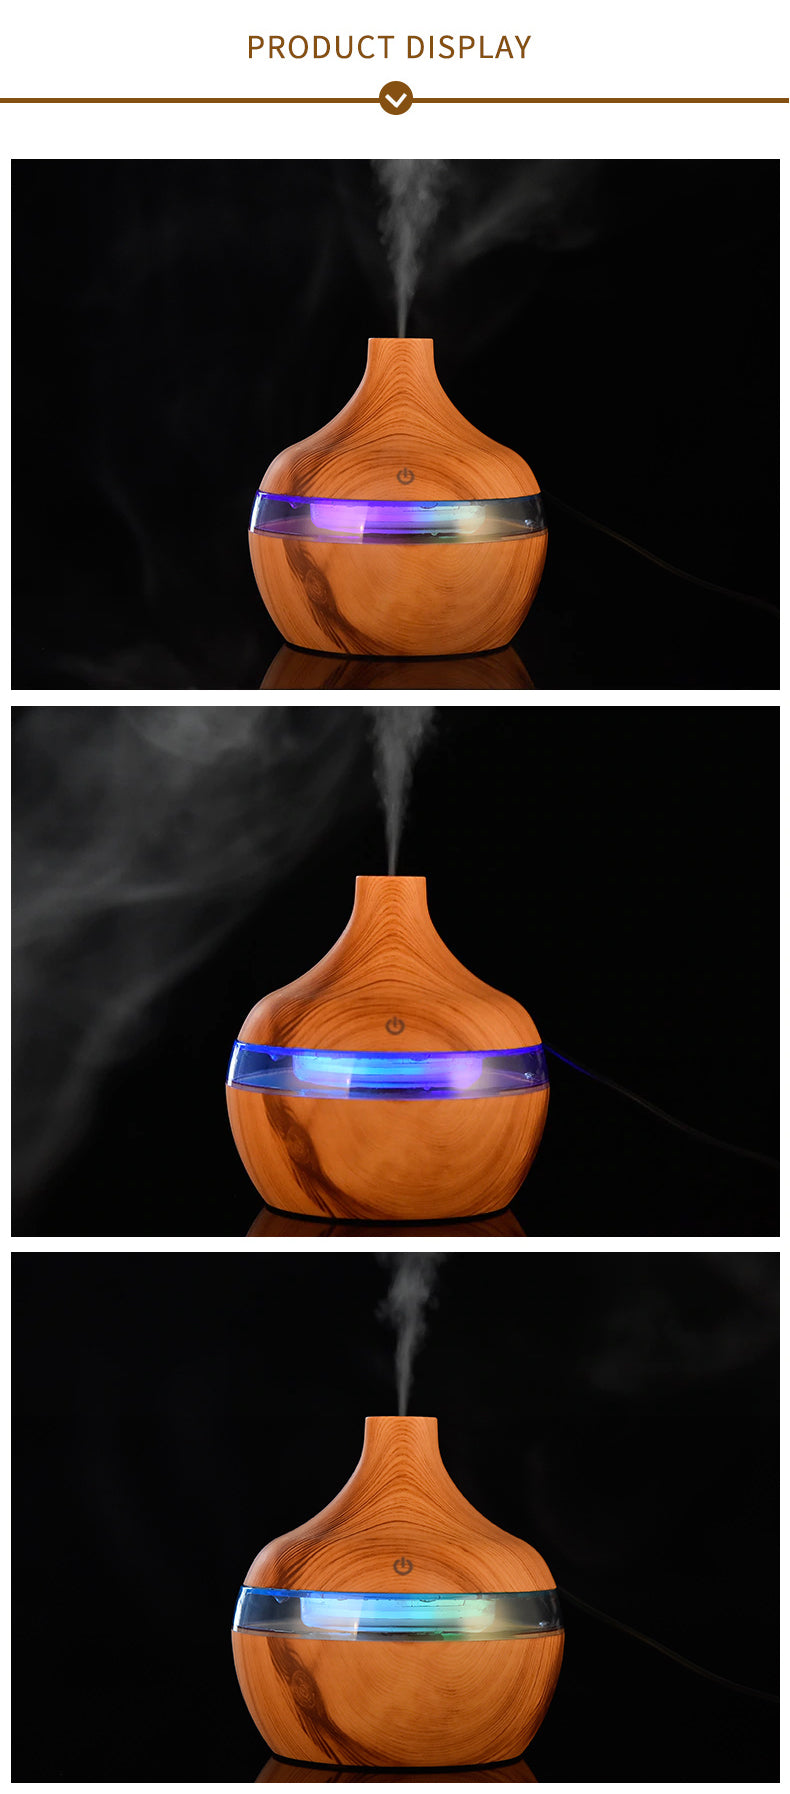 Aromatherapy Essential Oil USB Electric Oil Diffuser Ultrasonic Air Humidifier Wood Grain Mini Mist Maker Bedside LED Light